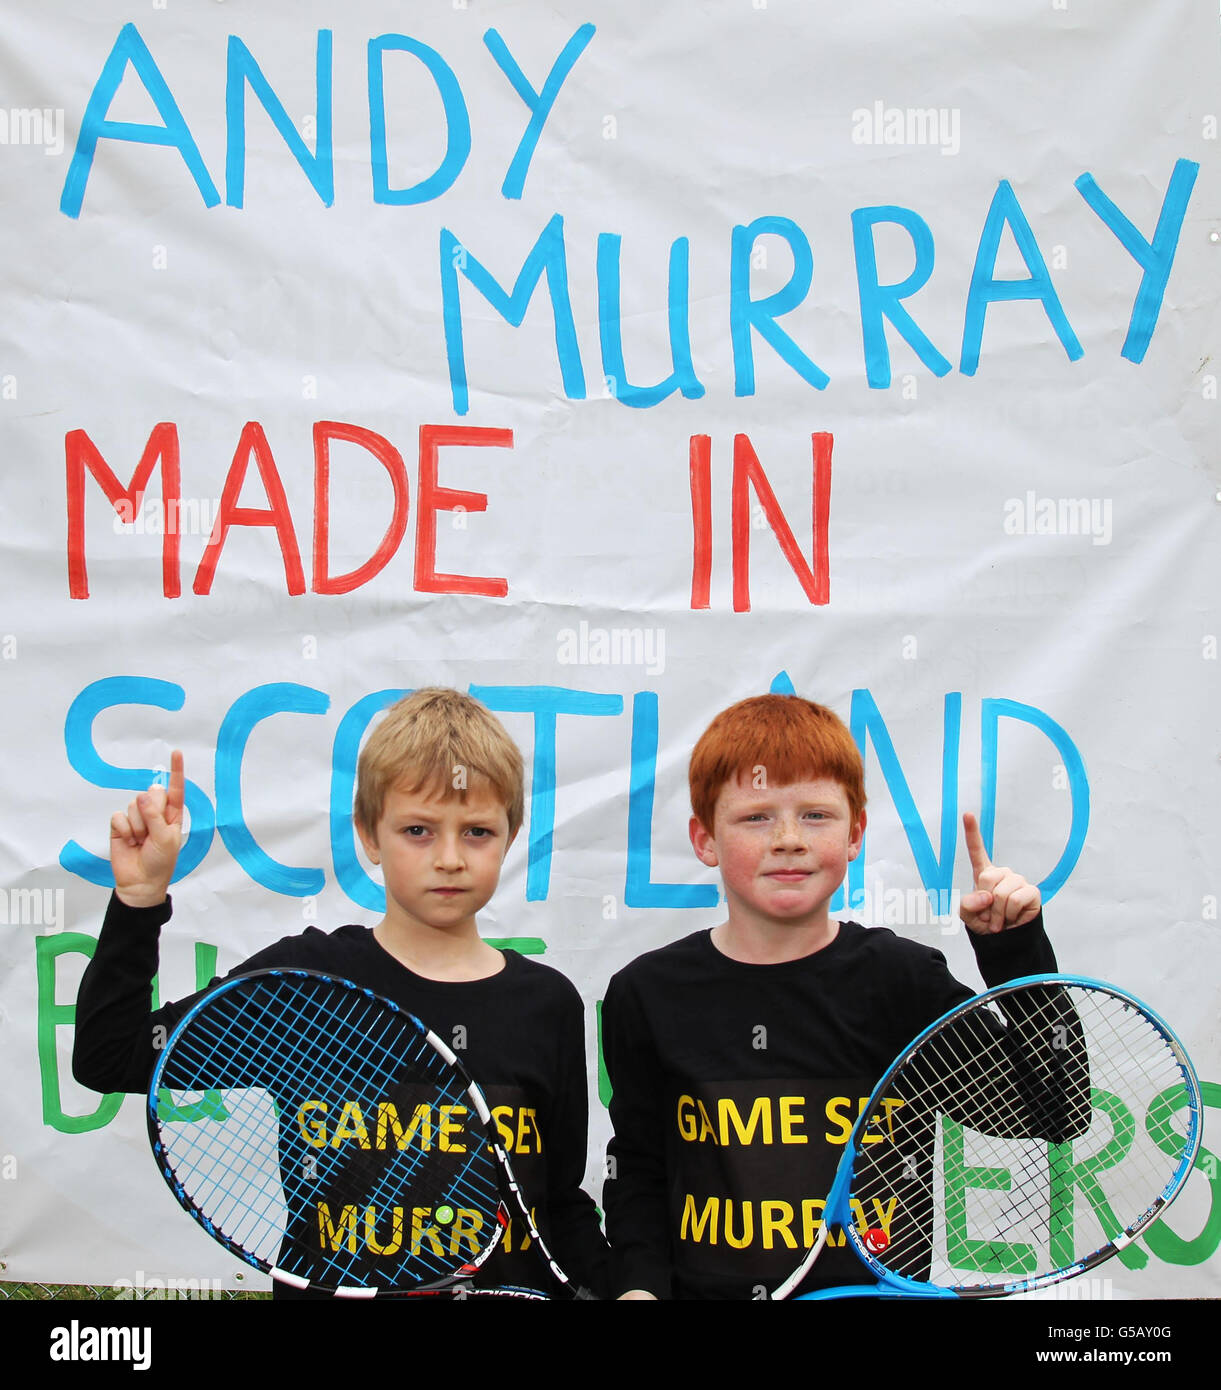 Dunblane Tennis Club members Finlay Sherriff 7 (left) and Sean Balman 8, both from Dunblane, strike the Andy Murray celebration pose, as the streets in Andy Murray's home town are almost deserted as tennis fans gather to watch his bid to become the first British man to win Wimbledon in 76 years. Stock Photo